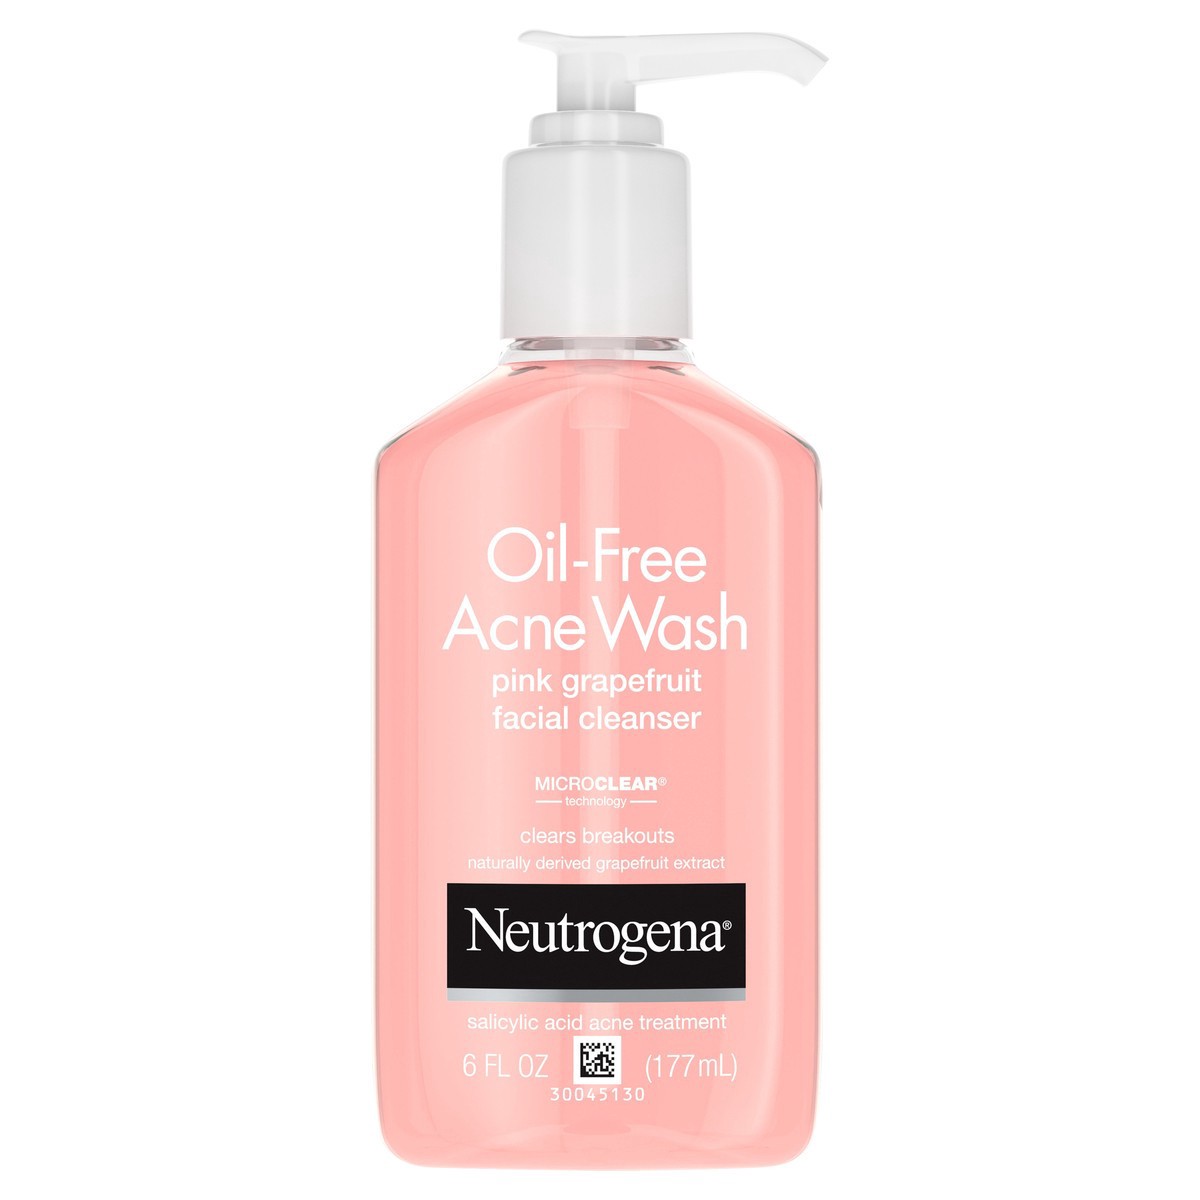 slide 1 of 10, Neutrogena Oil-Free Pink Grapefruit Pore Cleansing Acne Wash and Daily Liquid Facial Cleanser with 2% Salicylic Acid Acne Medicine and Vitamin C, 6 fl. oz, 6 oz